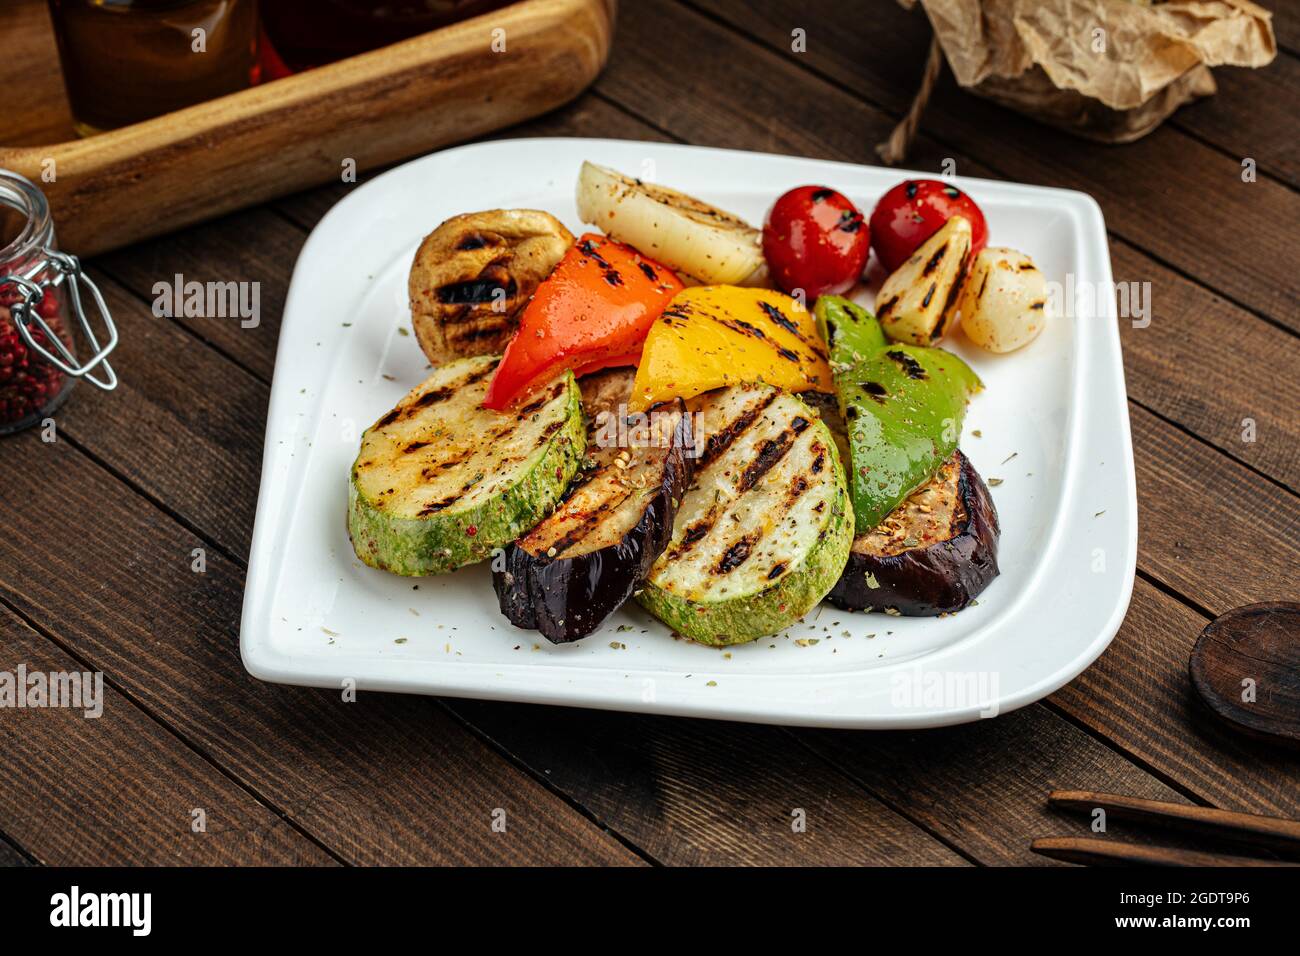 Assorted grilled vegetables plate garnish Stock Photo